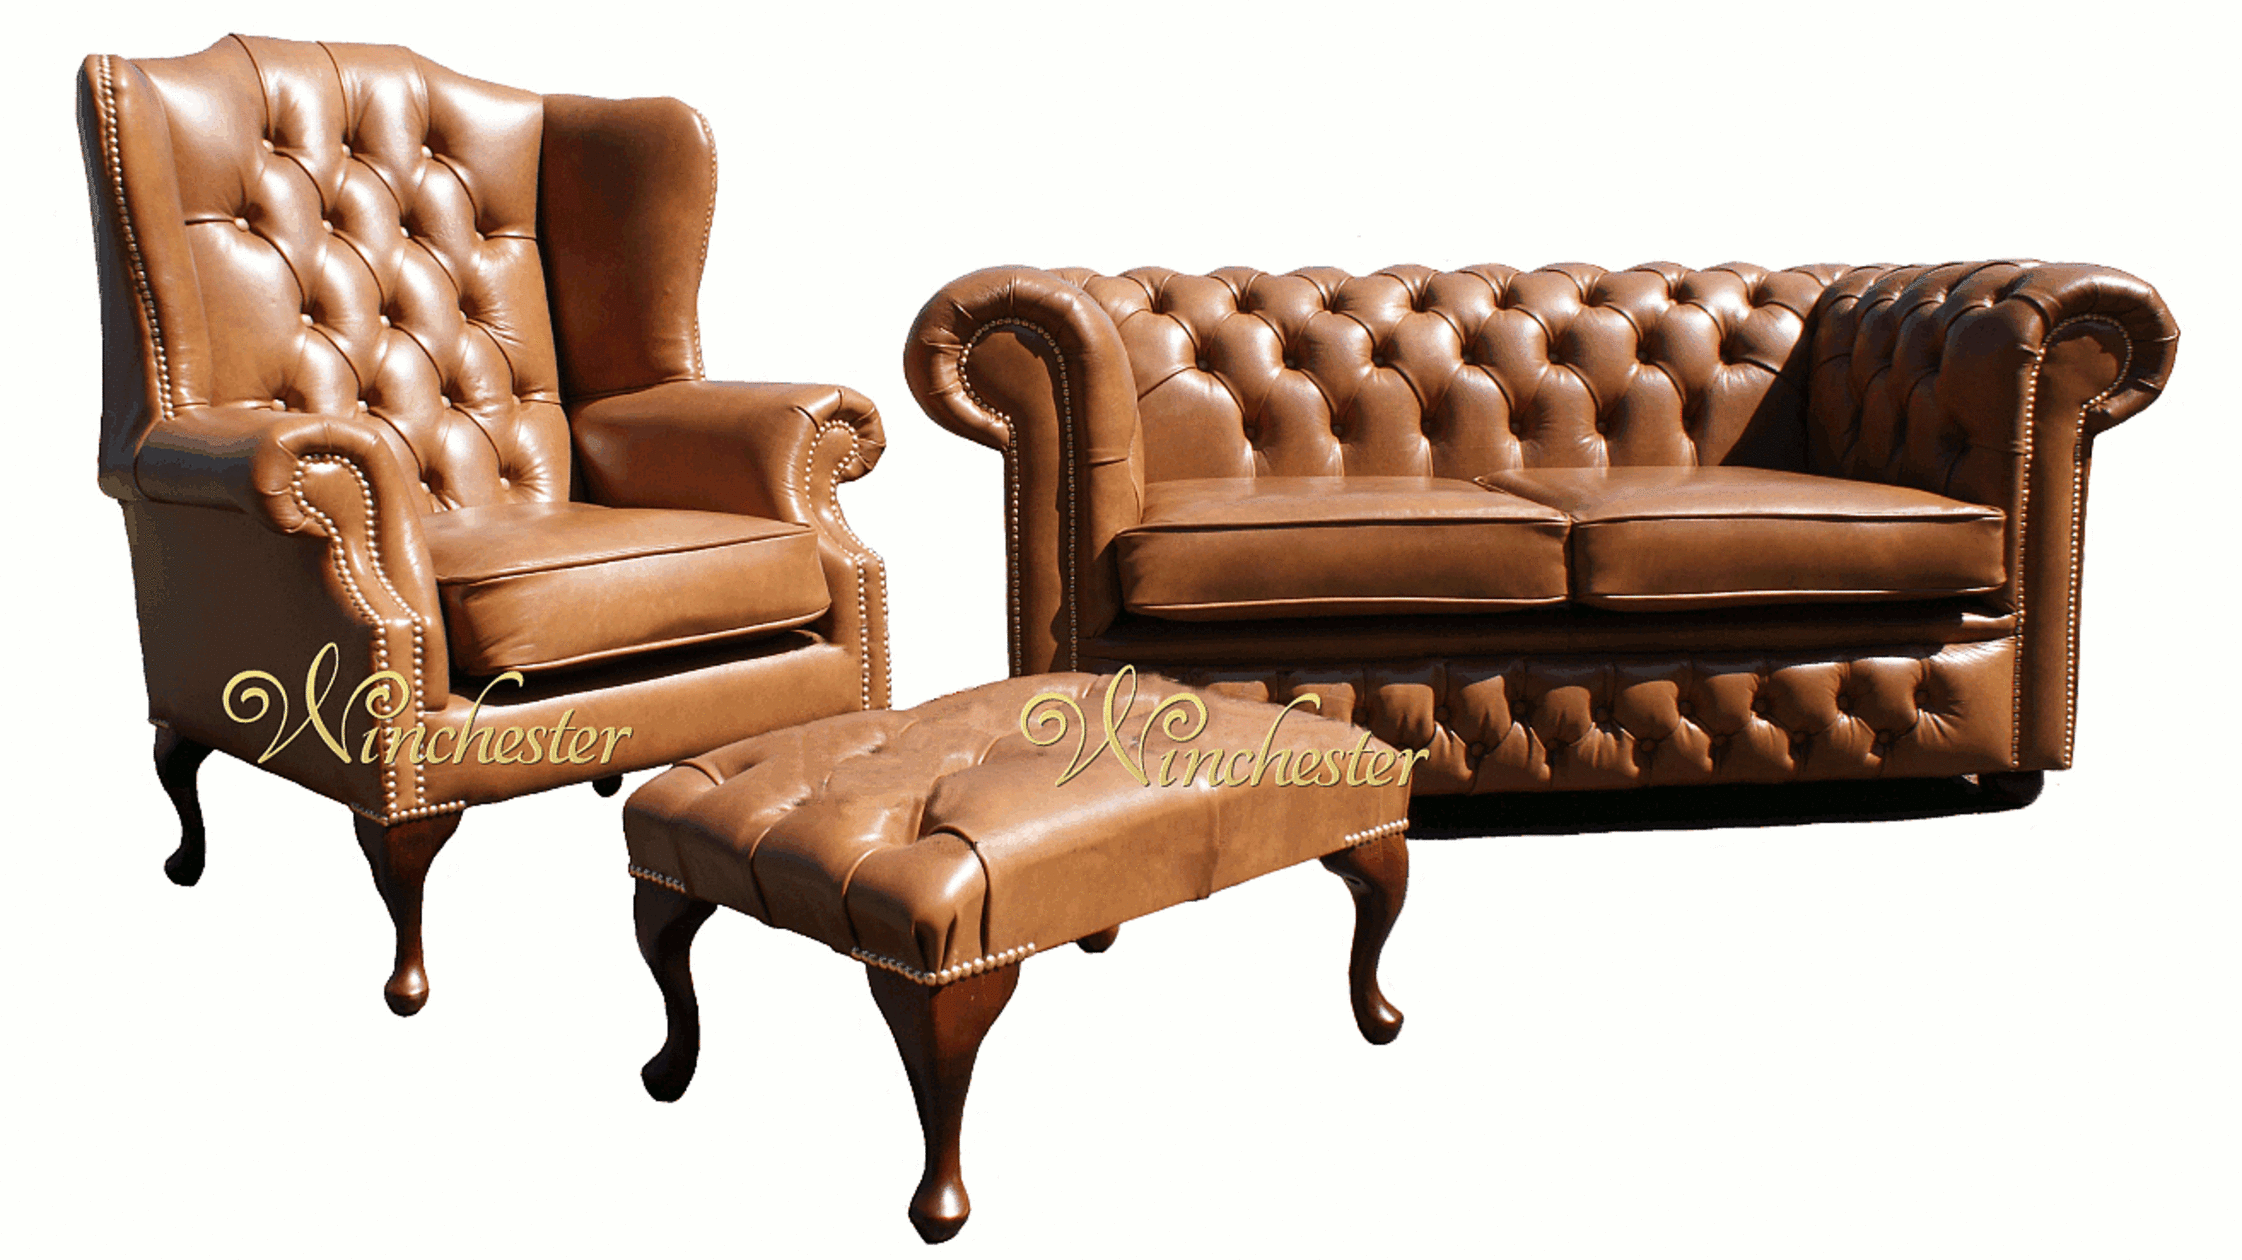 chesterfield furniture chesterfield sofa offers | chesterfield sofa sale u0026 discounts DUXCYLW